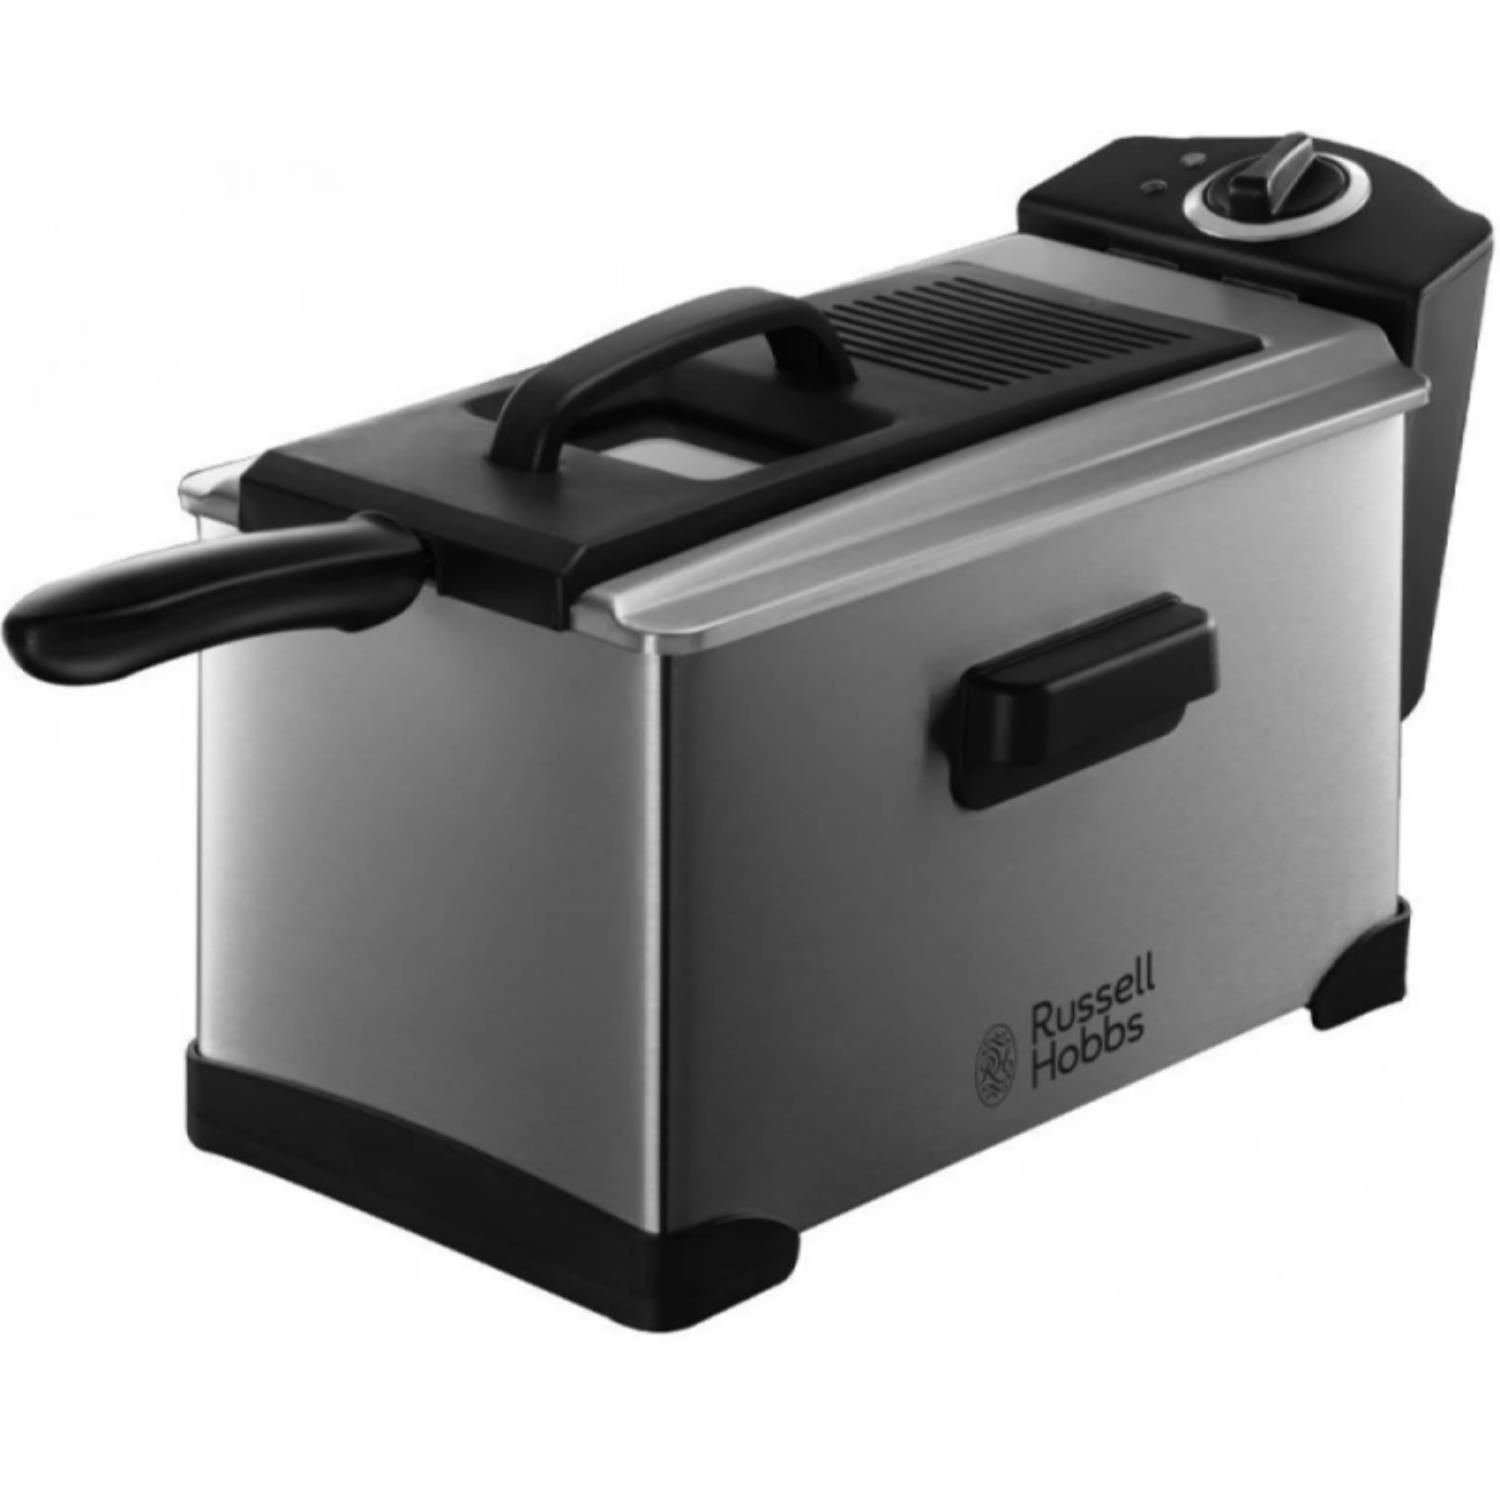 Russell Hobbs Cook@Home Friteuse 20946036005